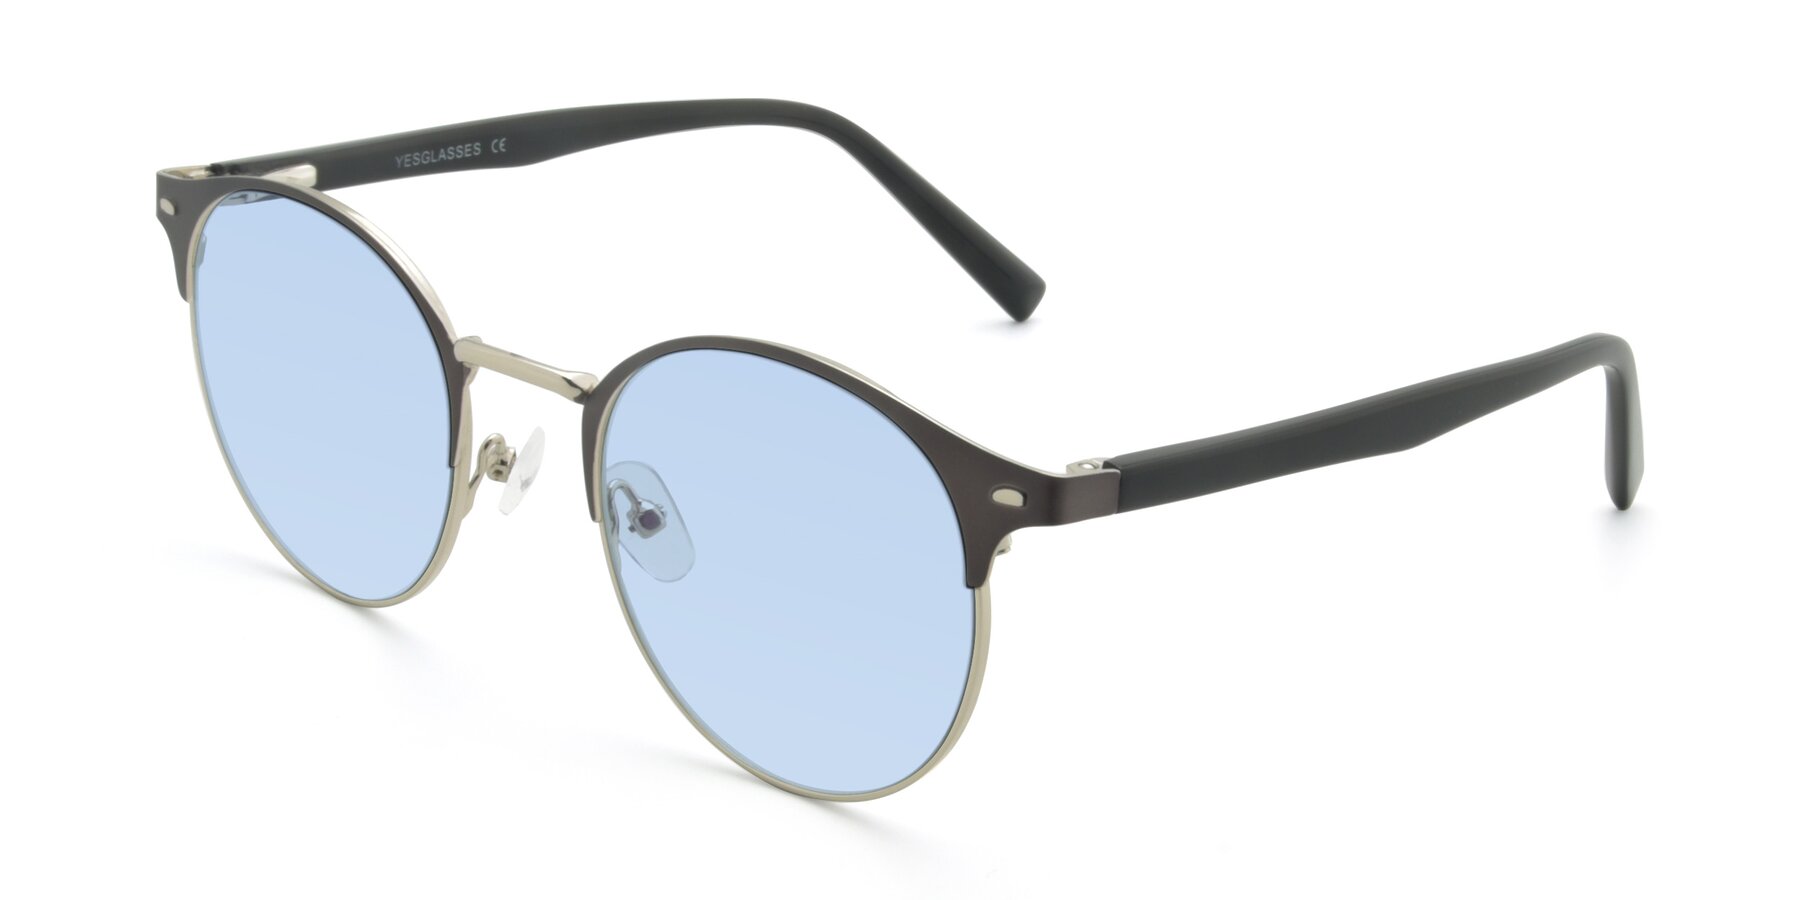 Angle of 9099 in Gray-Silver with Light Blue Tinted Lenses